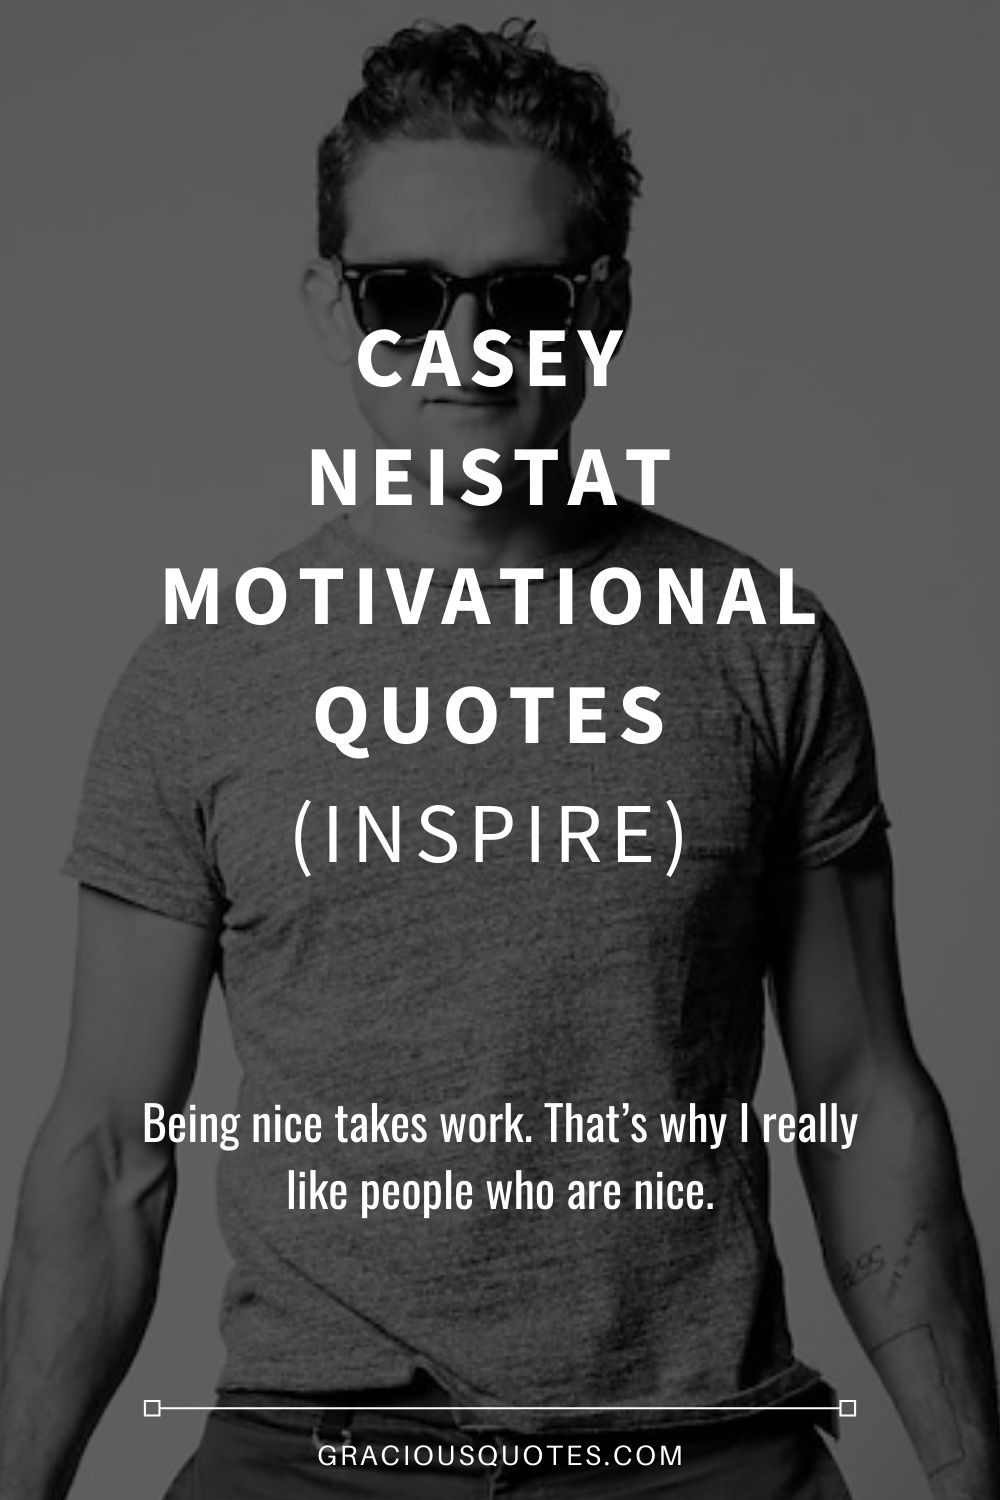 Casey Neistat Motivational Quotes (INSPIRE) - Gracious Quotes